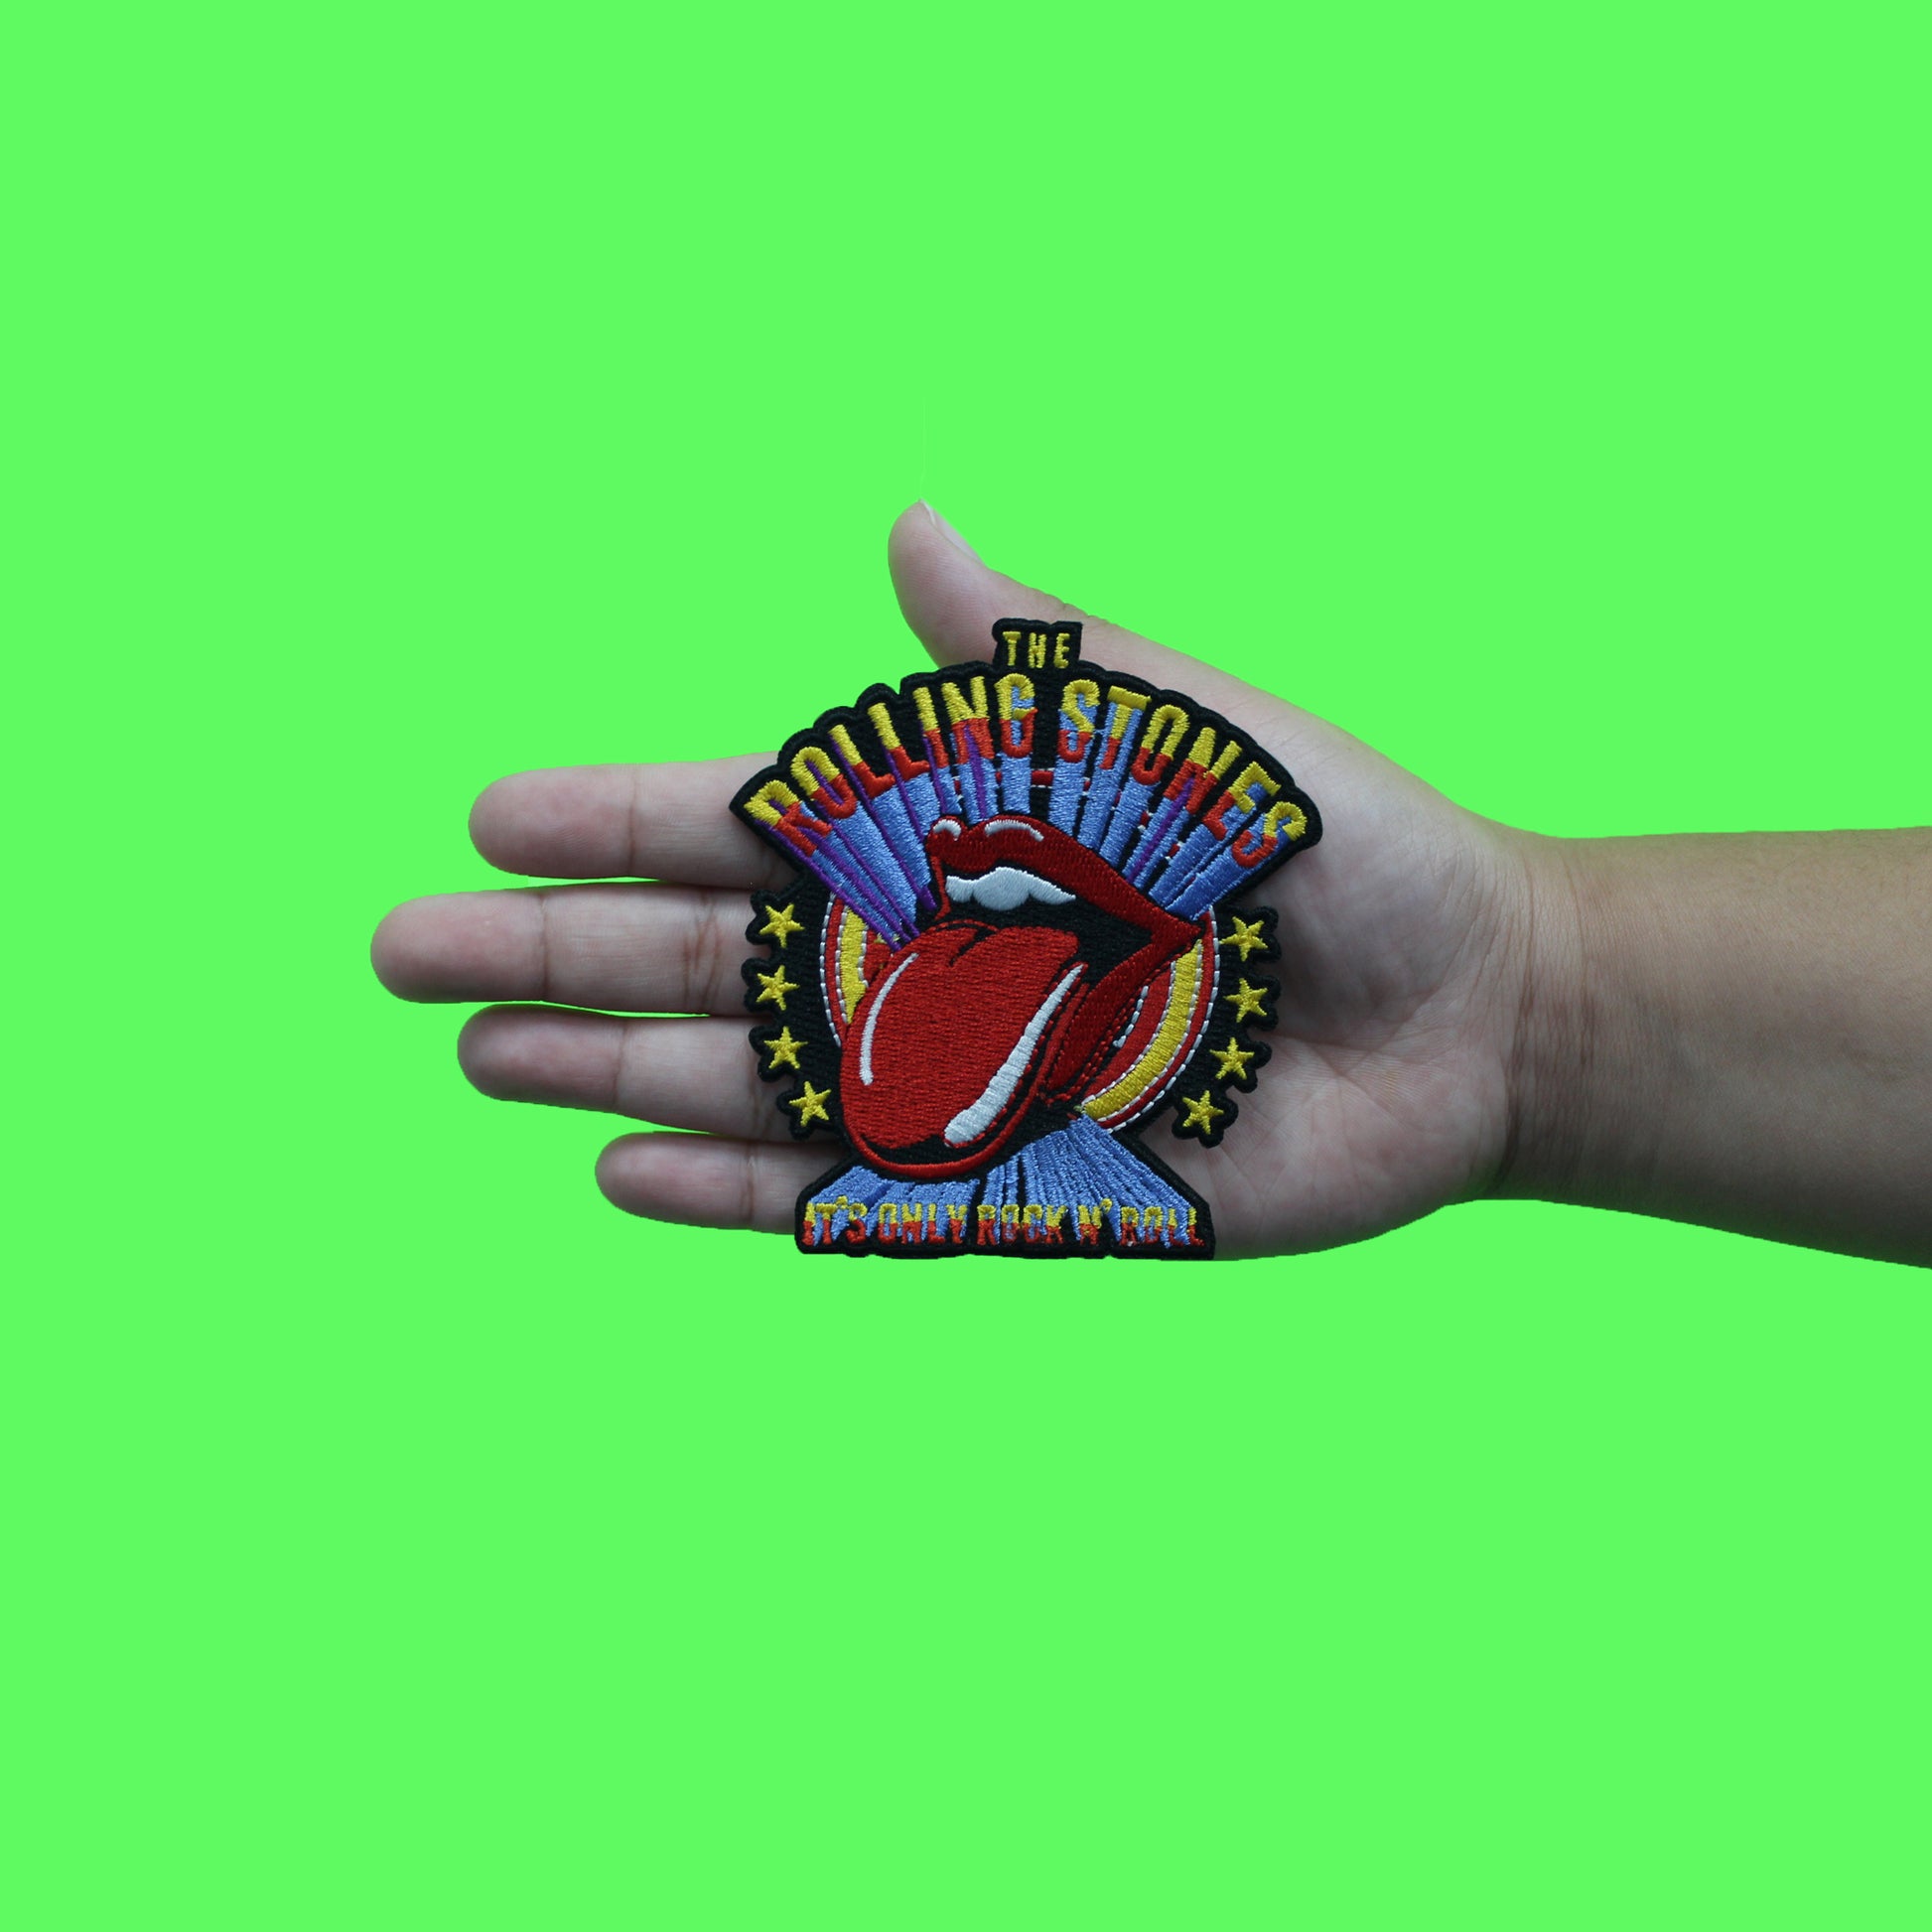 Its Only Rock N' Roll Patch Rolling Stones Classic Embroidered Iron On